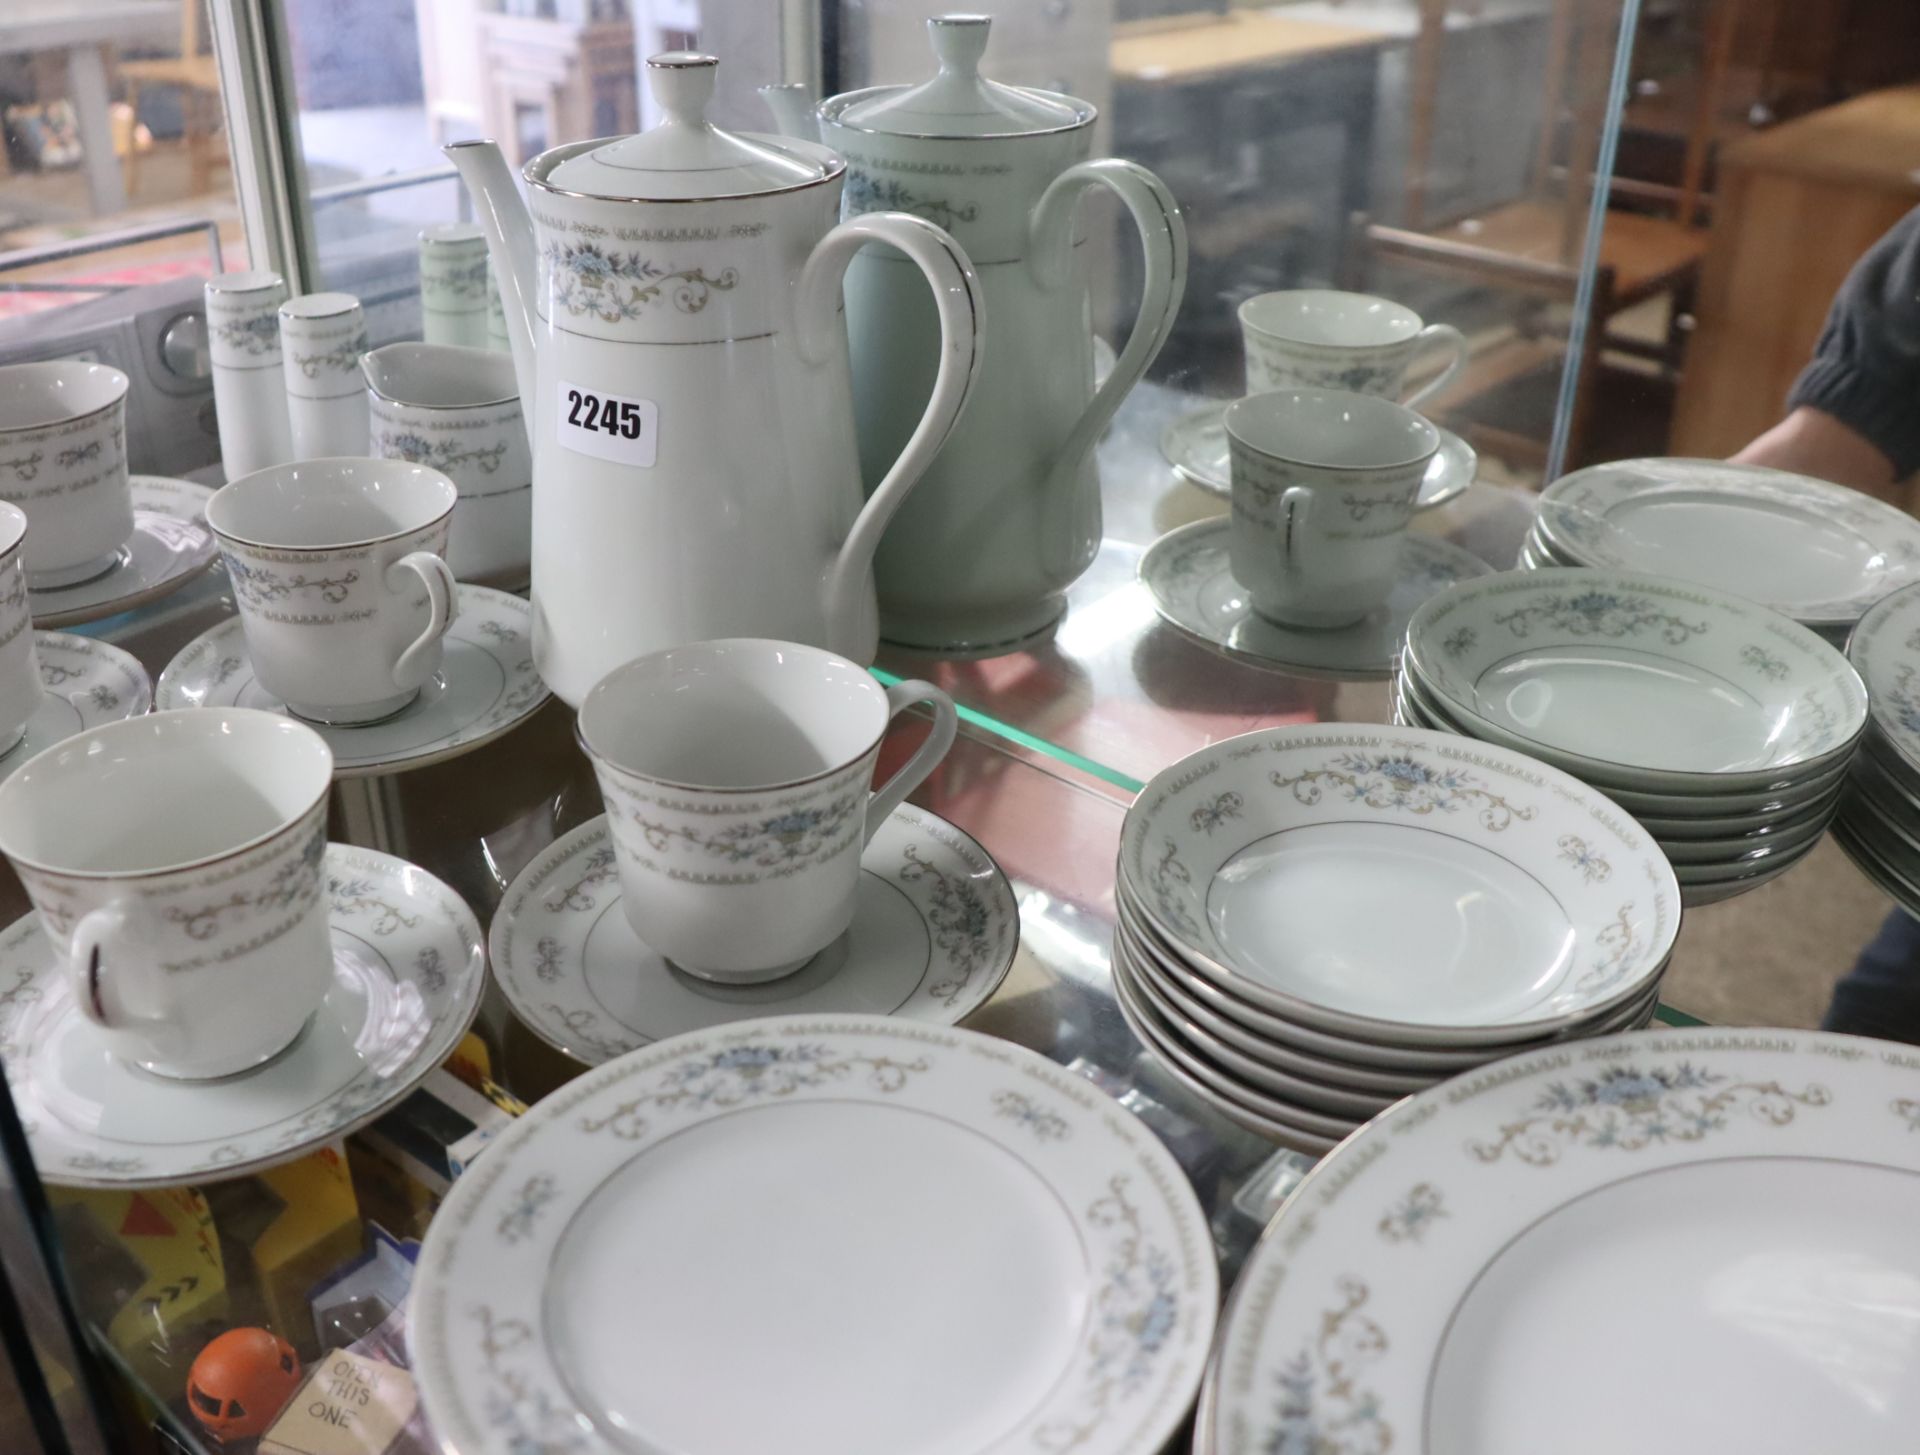 Approx. 32 pieces of Japanese porcelain